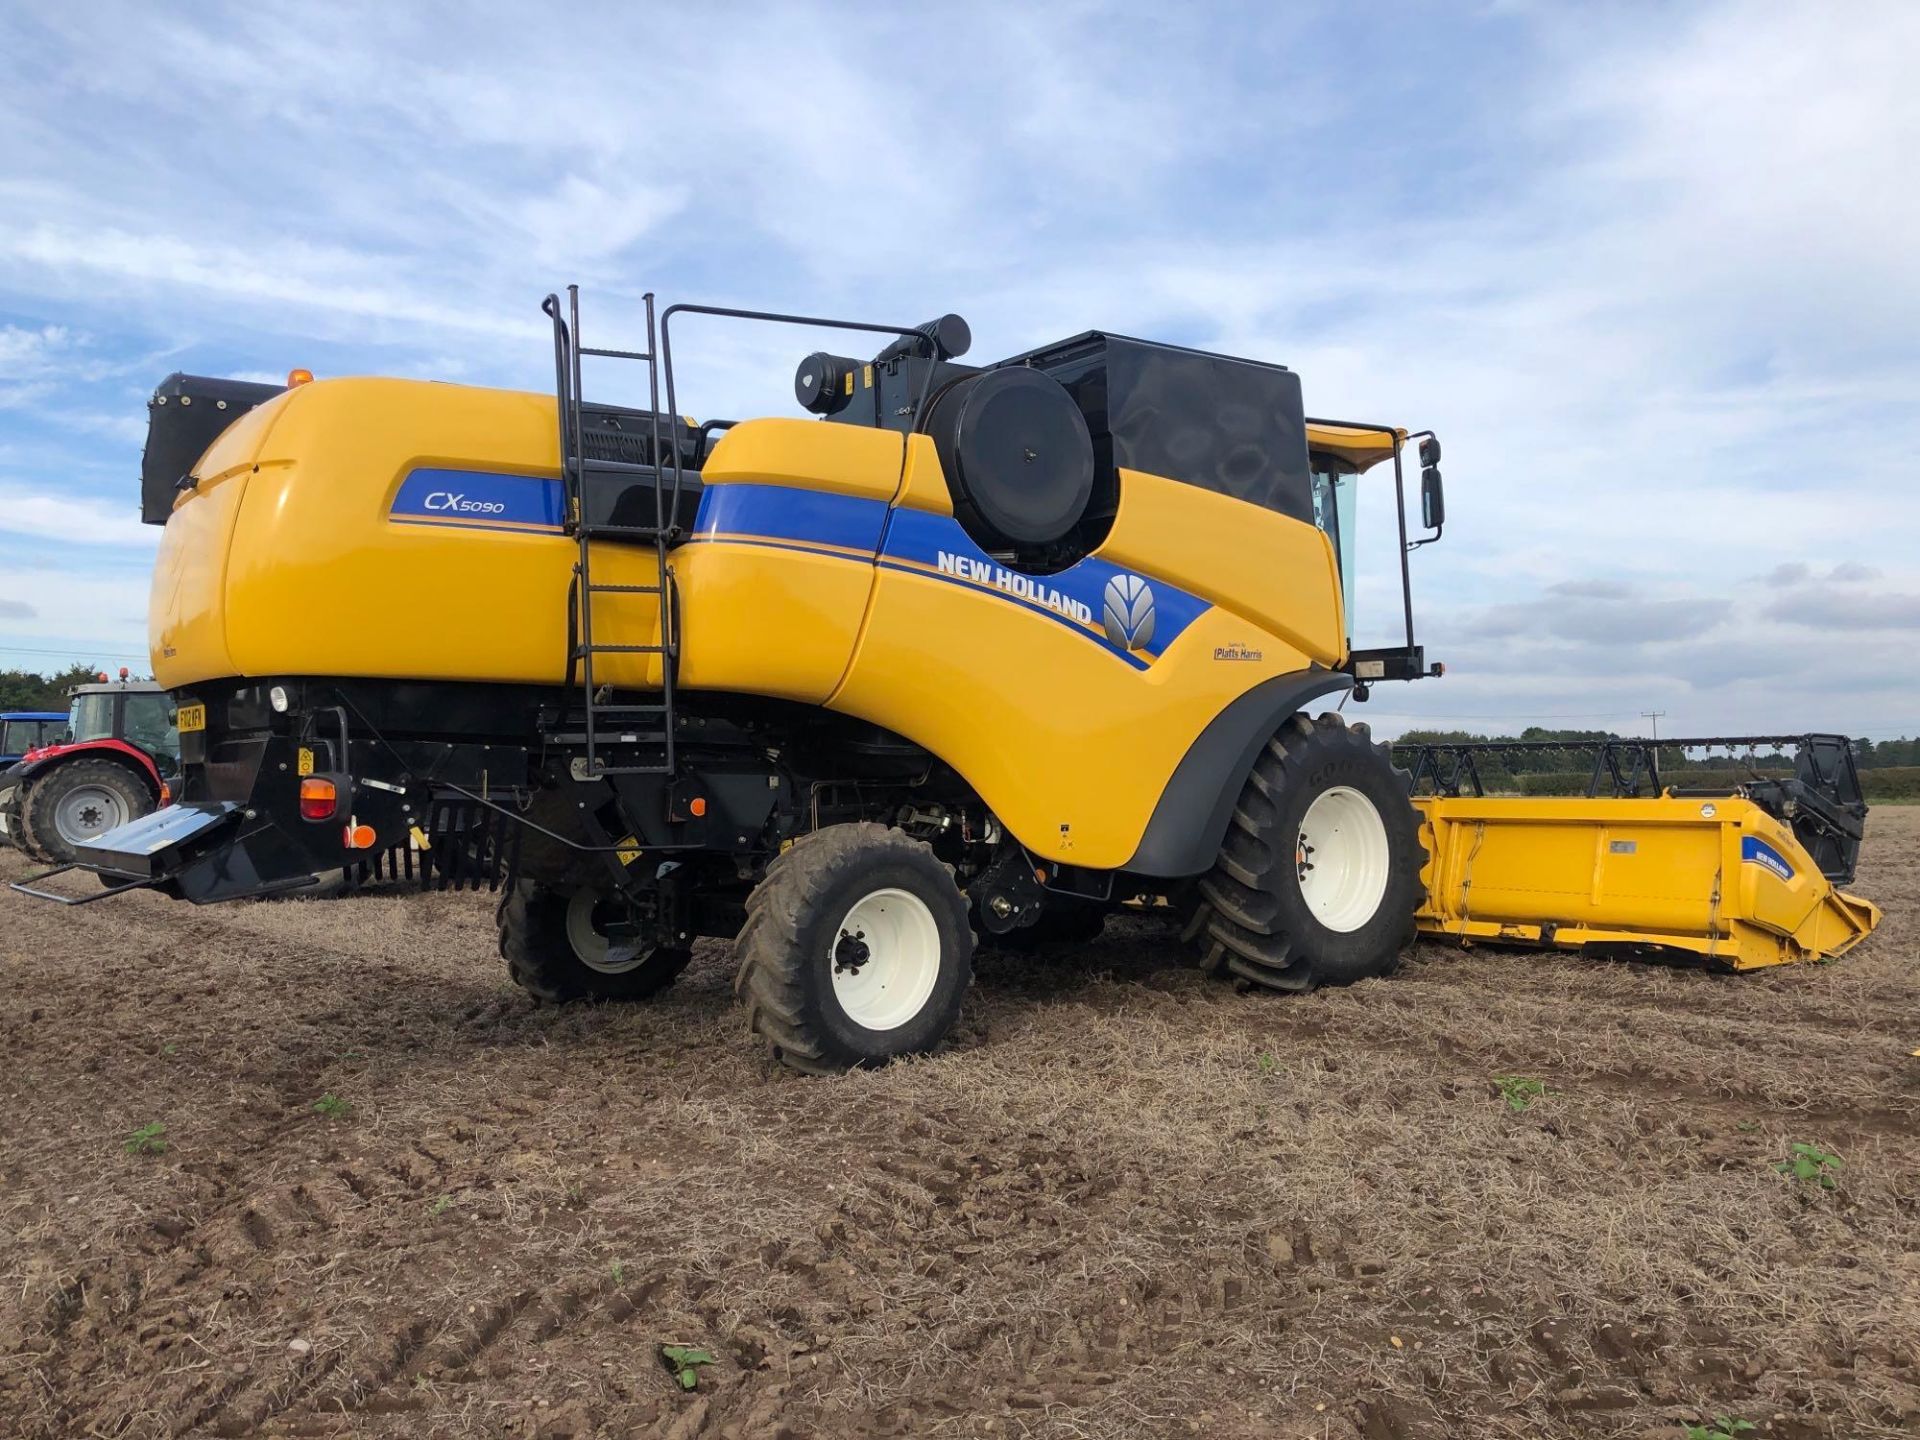 2011 New Holland CX5090 combine harvester with 20ft Varifeed header and trolley and straw chopper on - Image 28 of 33